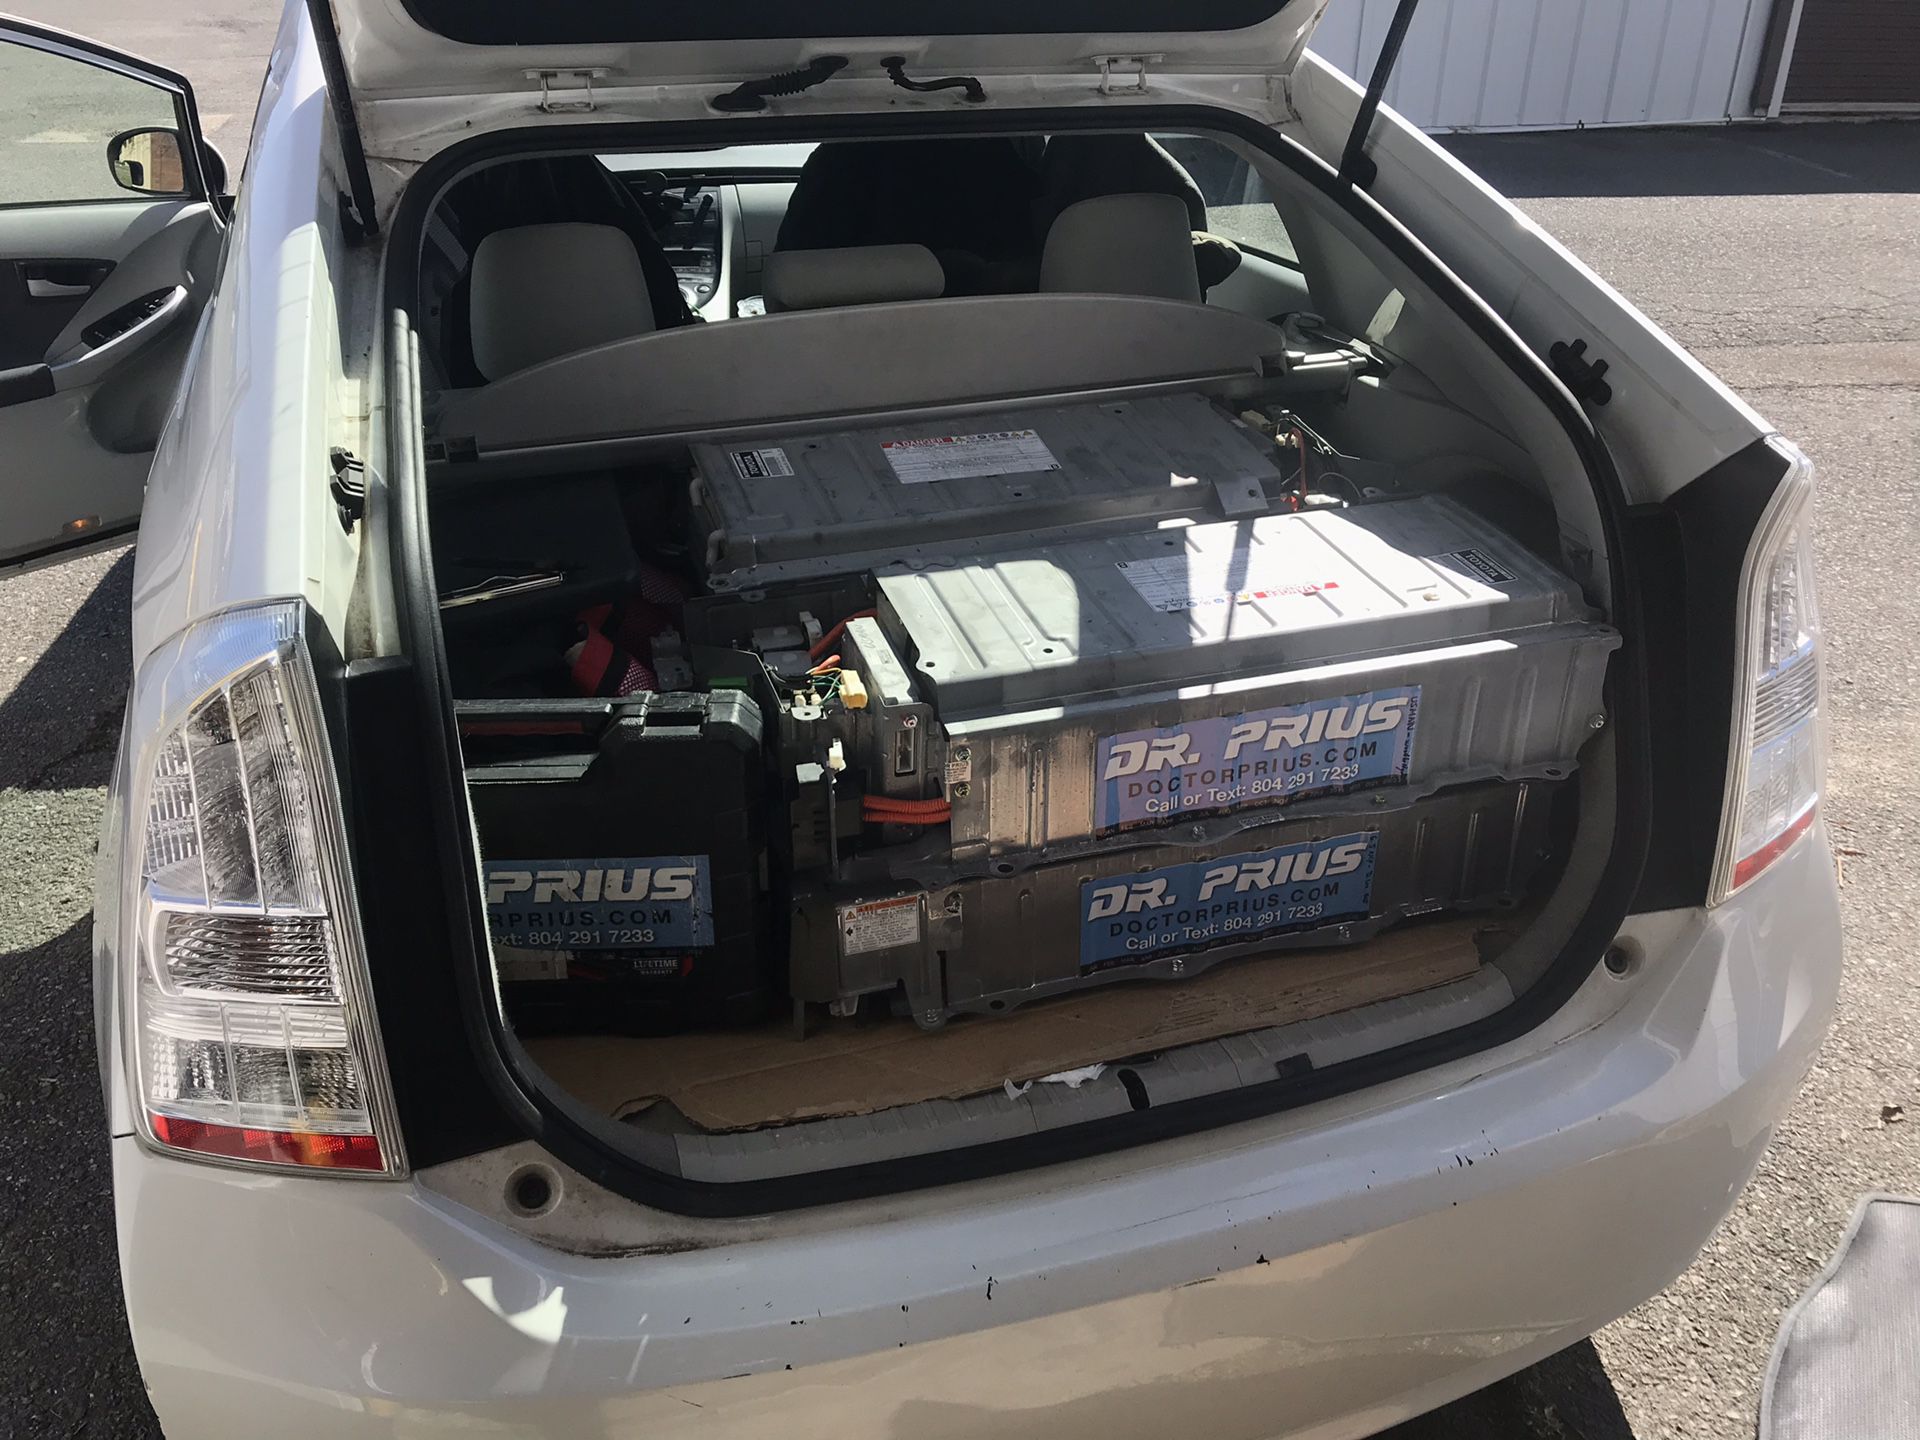 Toyota Prius, Camry and Lexus hybrid battery